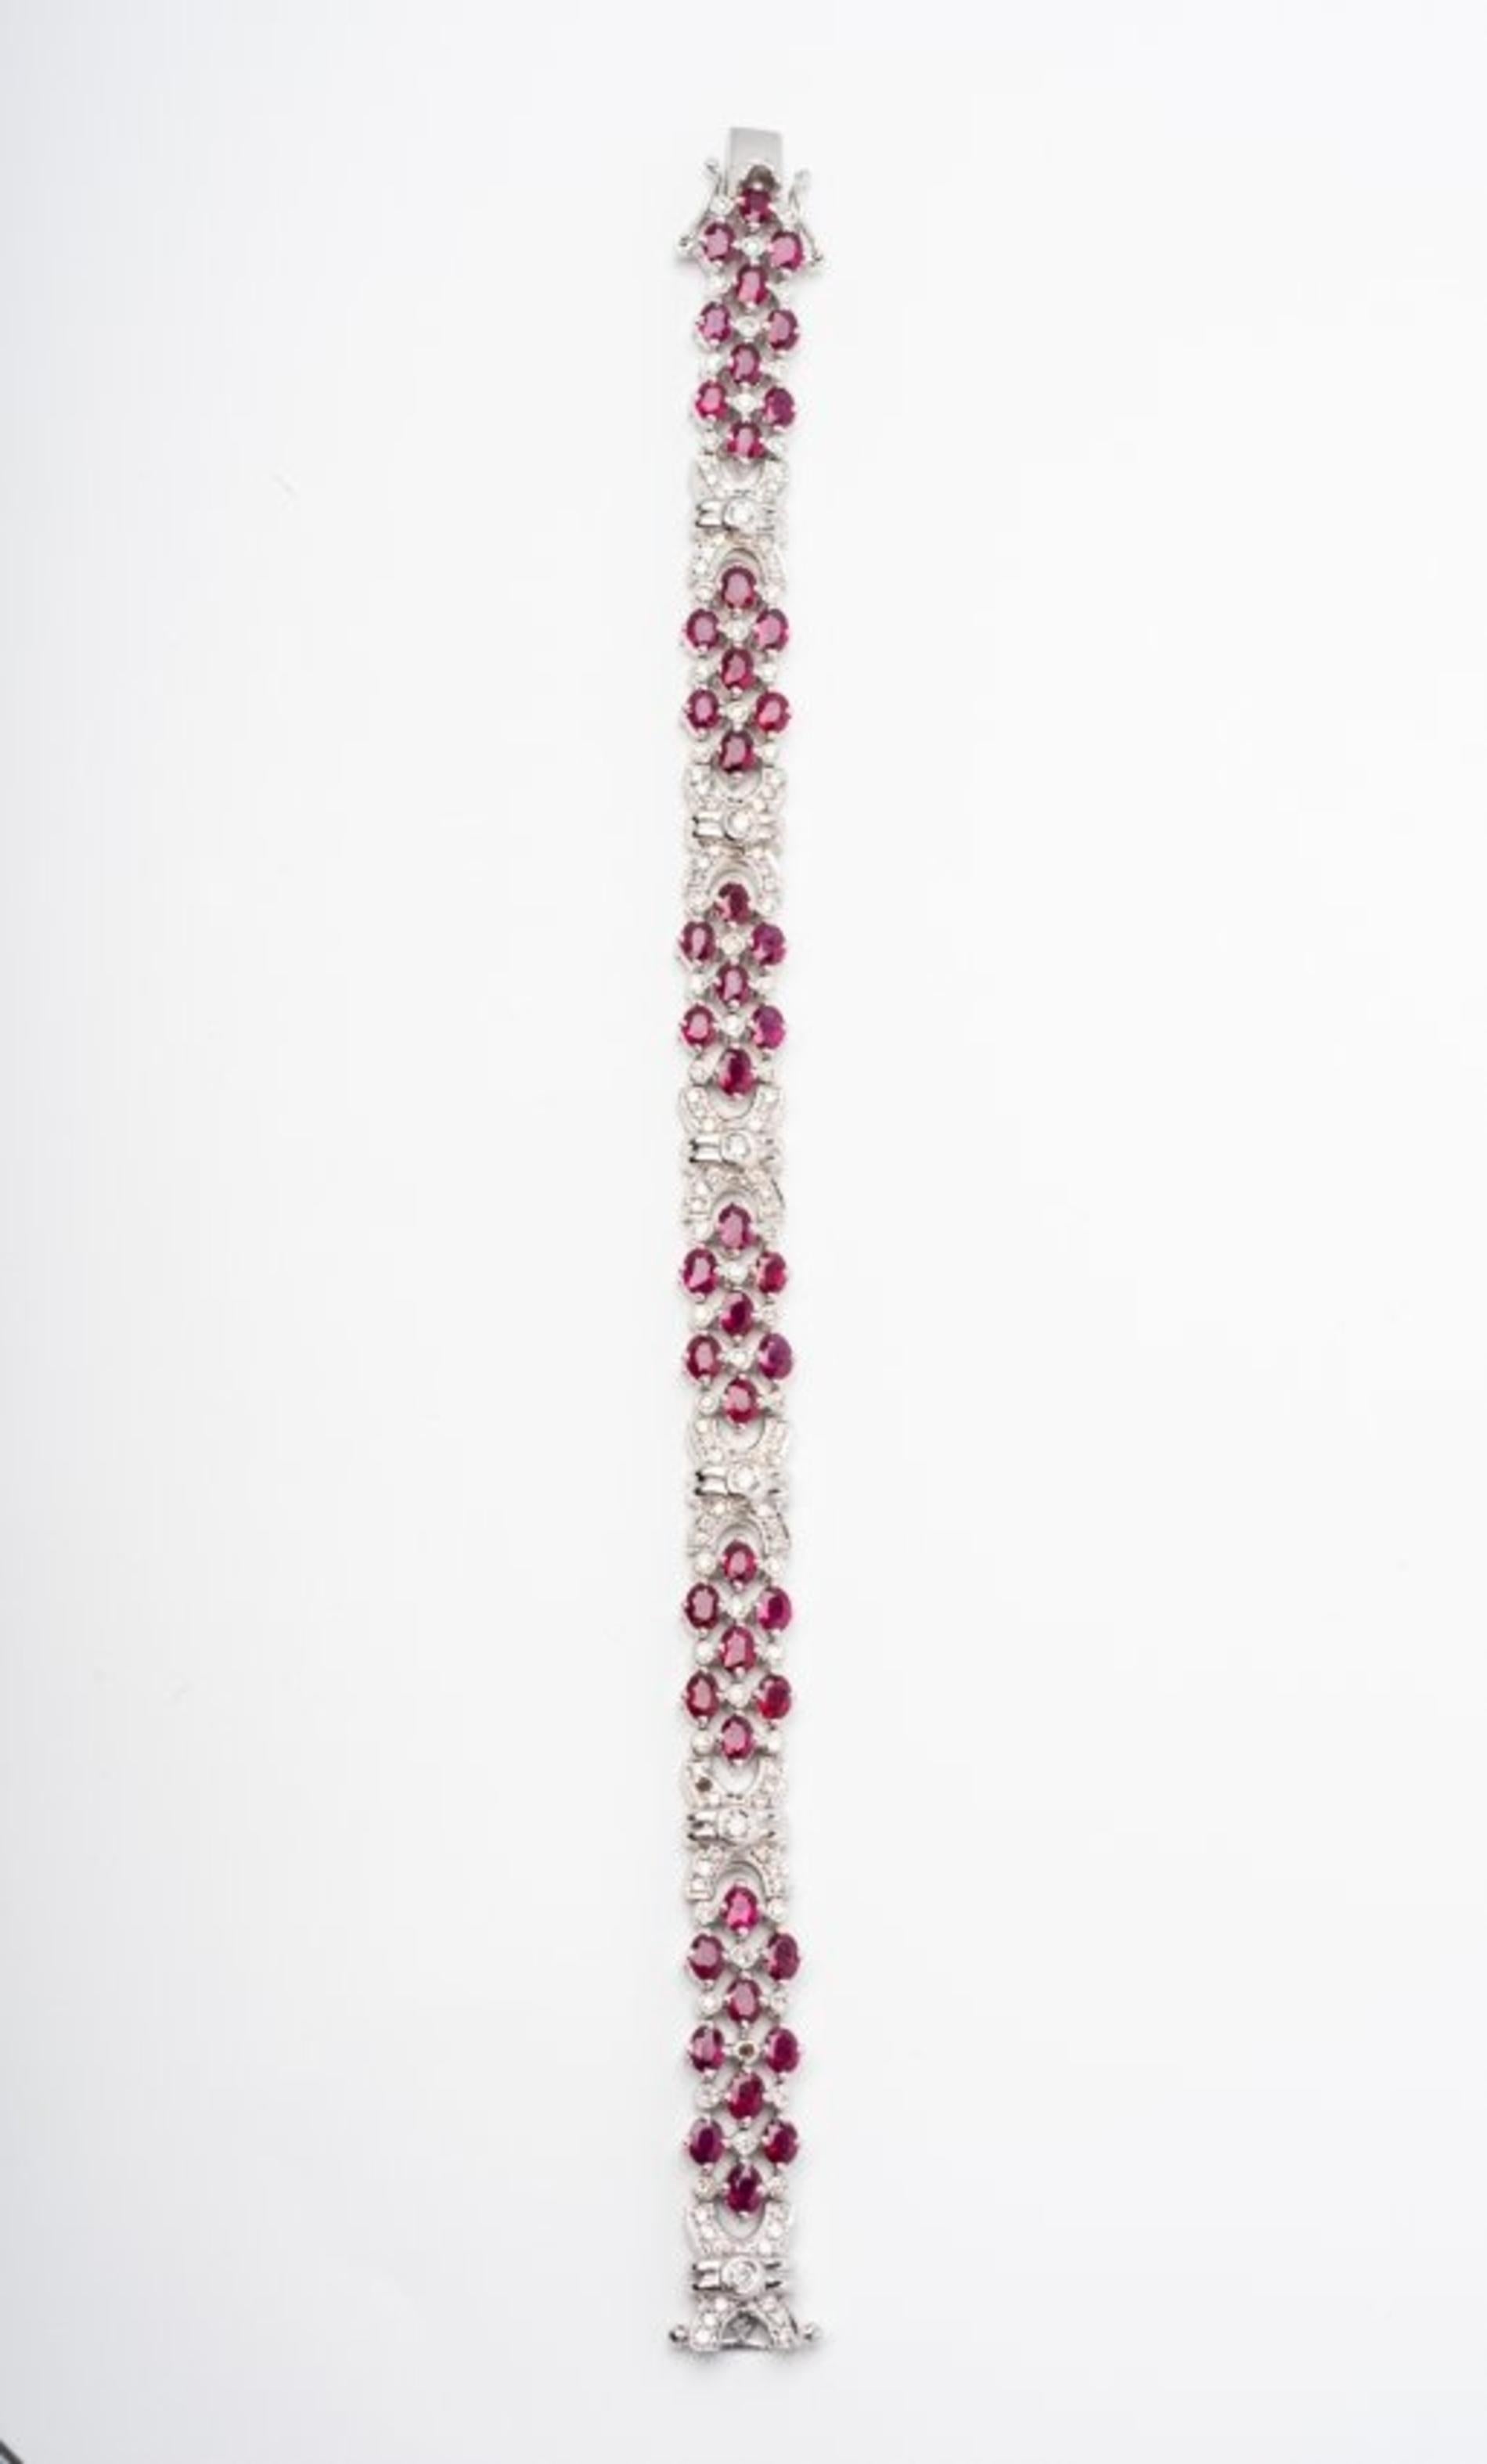 Ruby and Diamond Bracelet 
composed of numerous pear-shaped rubies and brilliant-cut diamonds, mounted in 18 karat white gold, length approximately 7 1/2 inches
gross weight approximately 20 dwts,